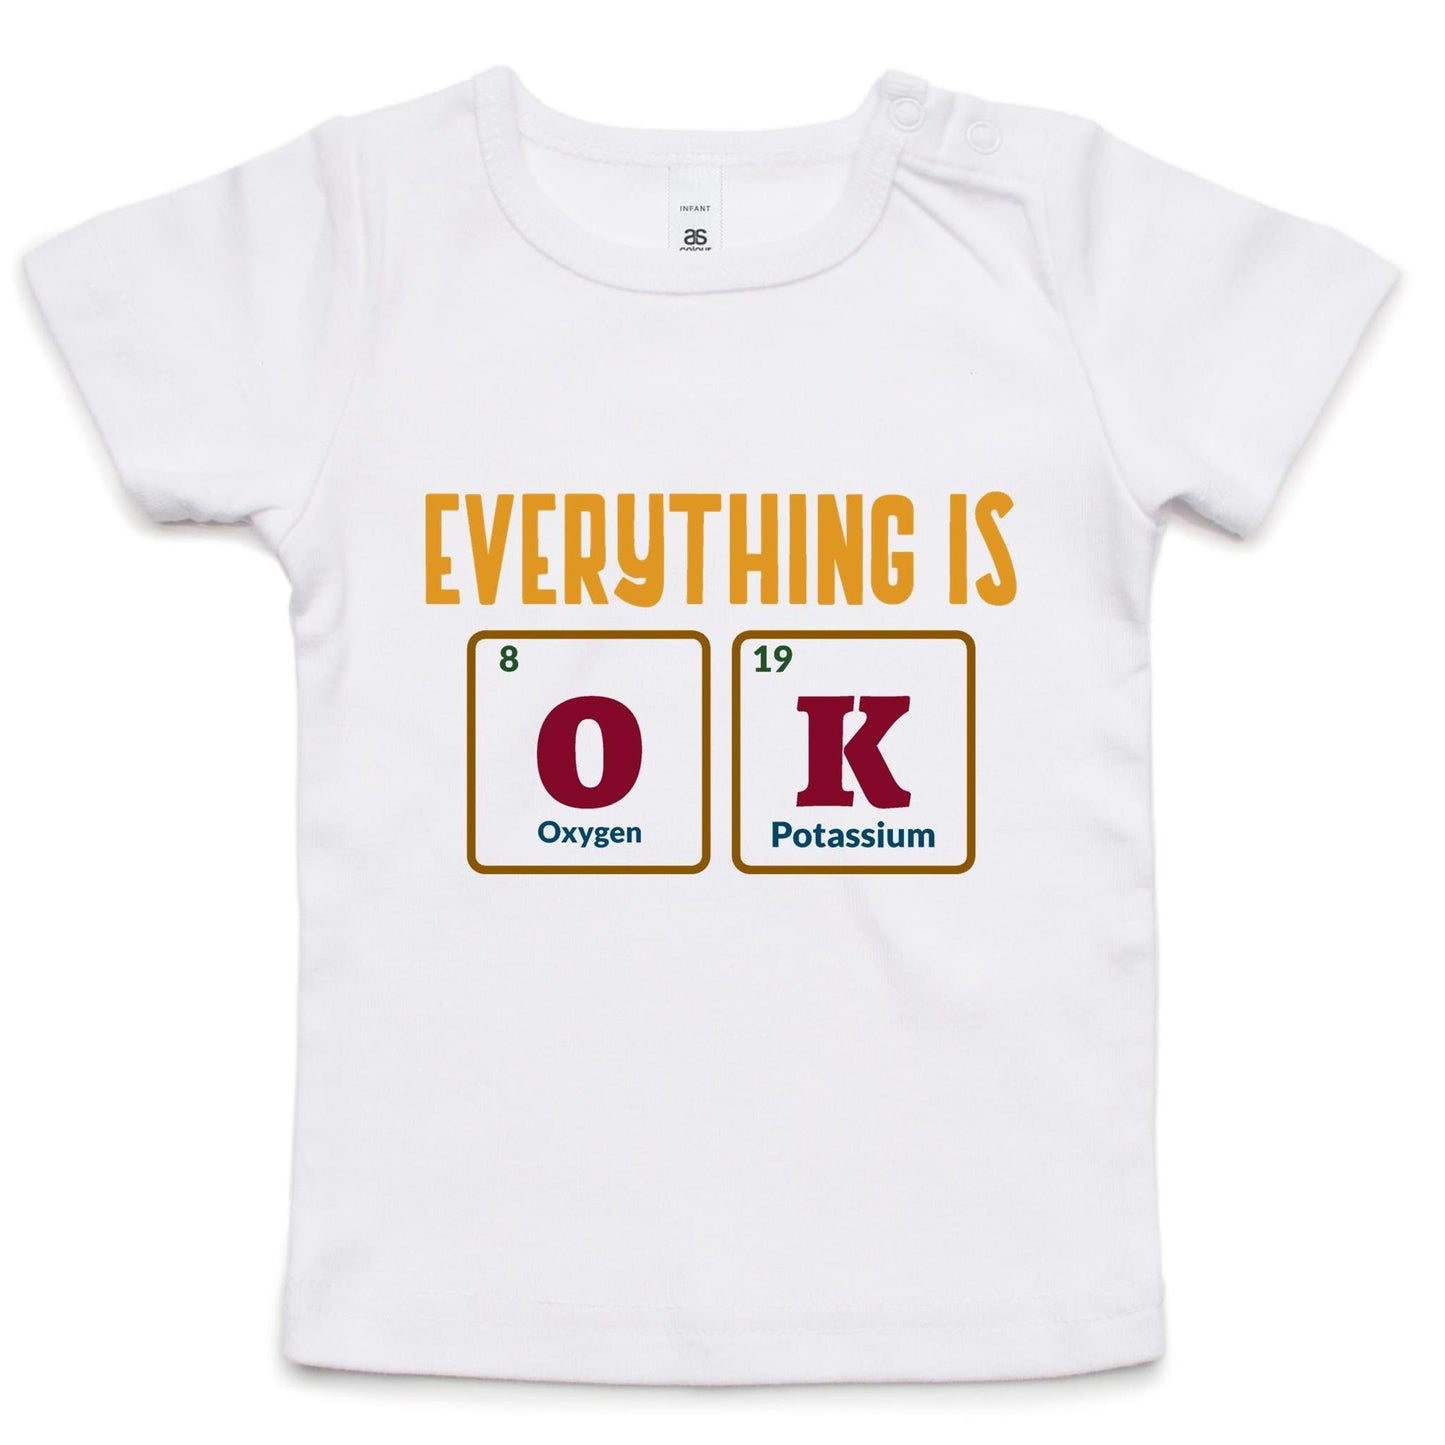 Everything Is OK, Periodic Table Of Elements - Baby T-shirt White Baby T-shirt Science